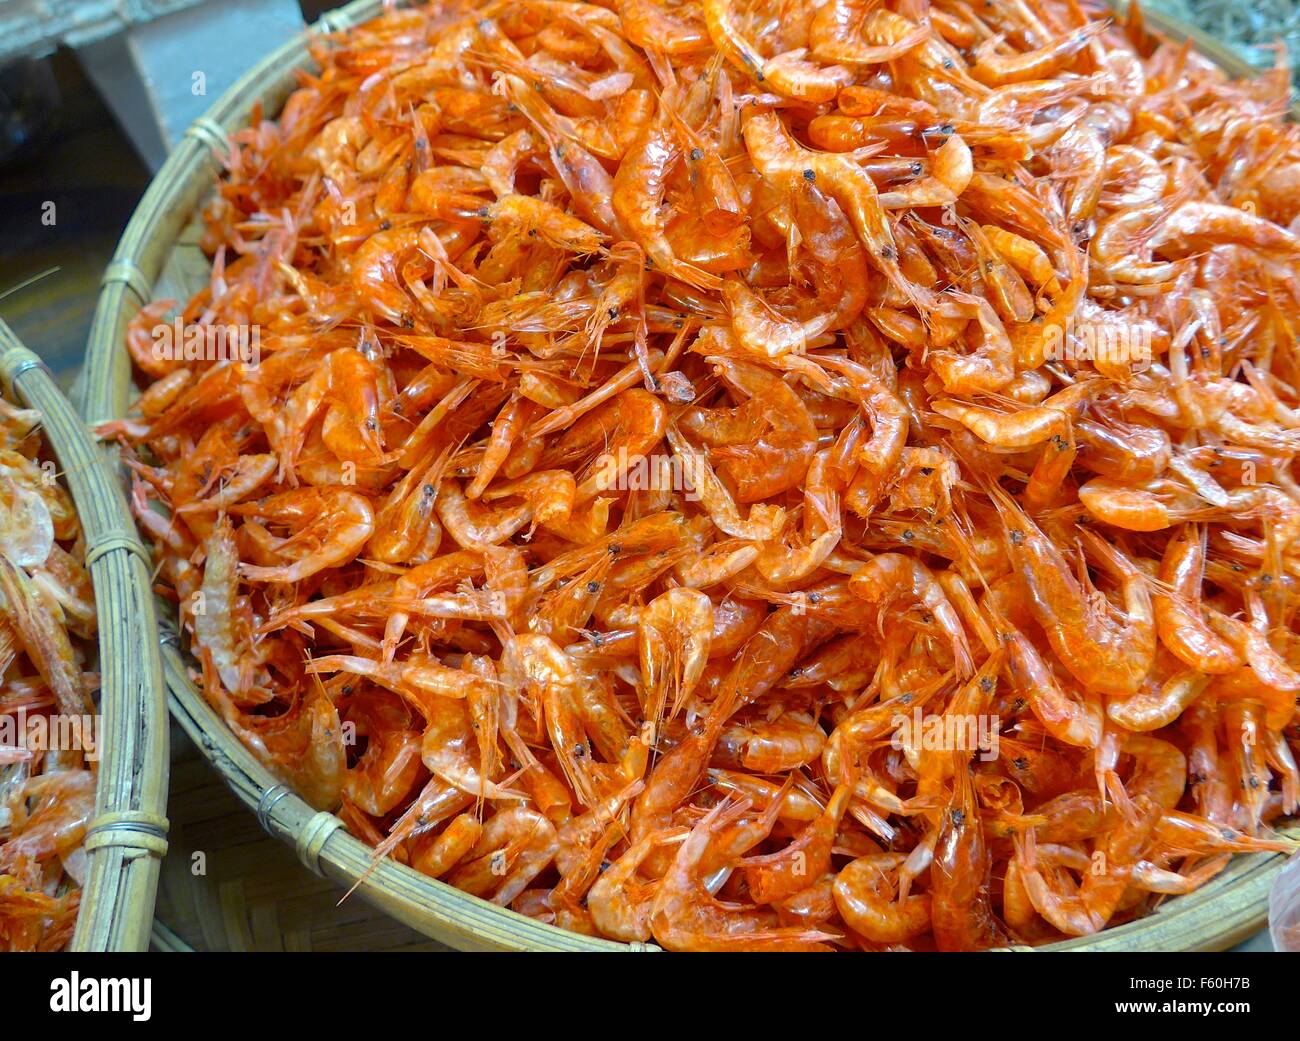 The closeup of dried shrimp in market Stock Photo